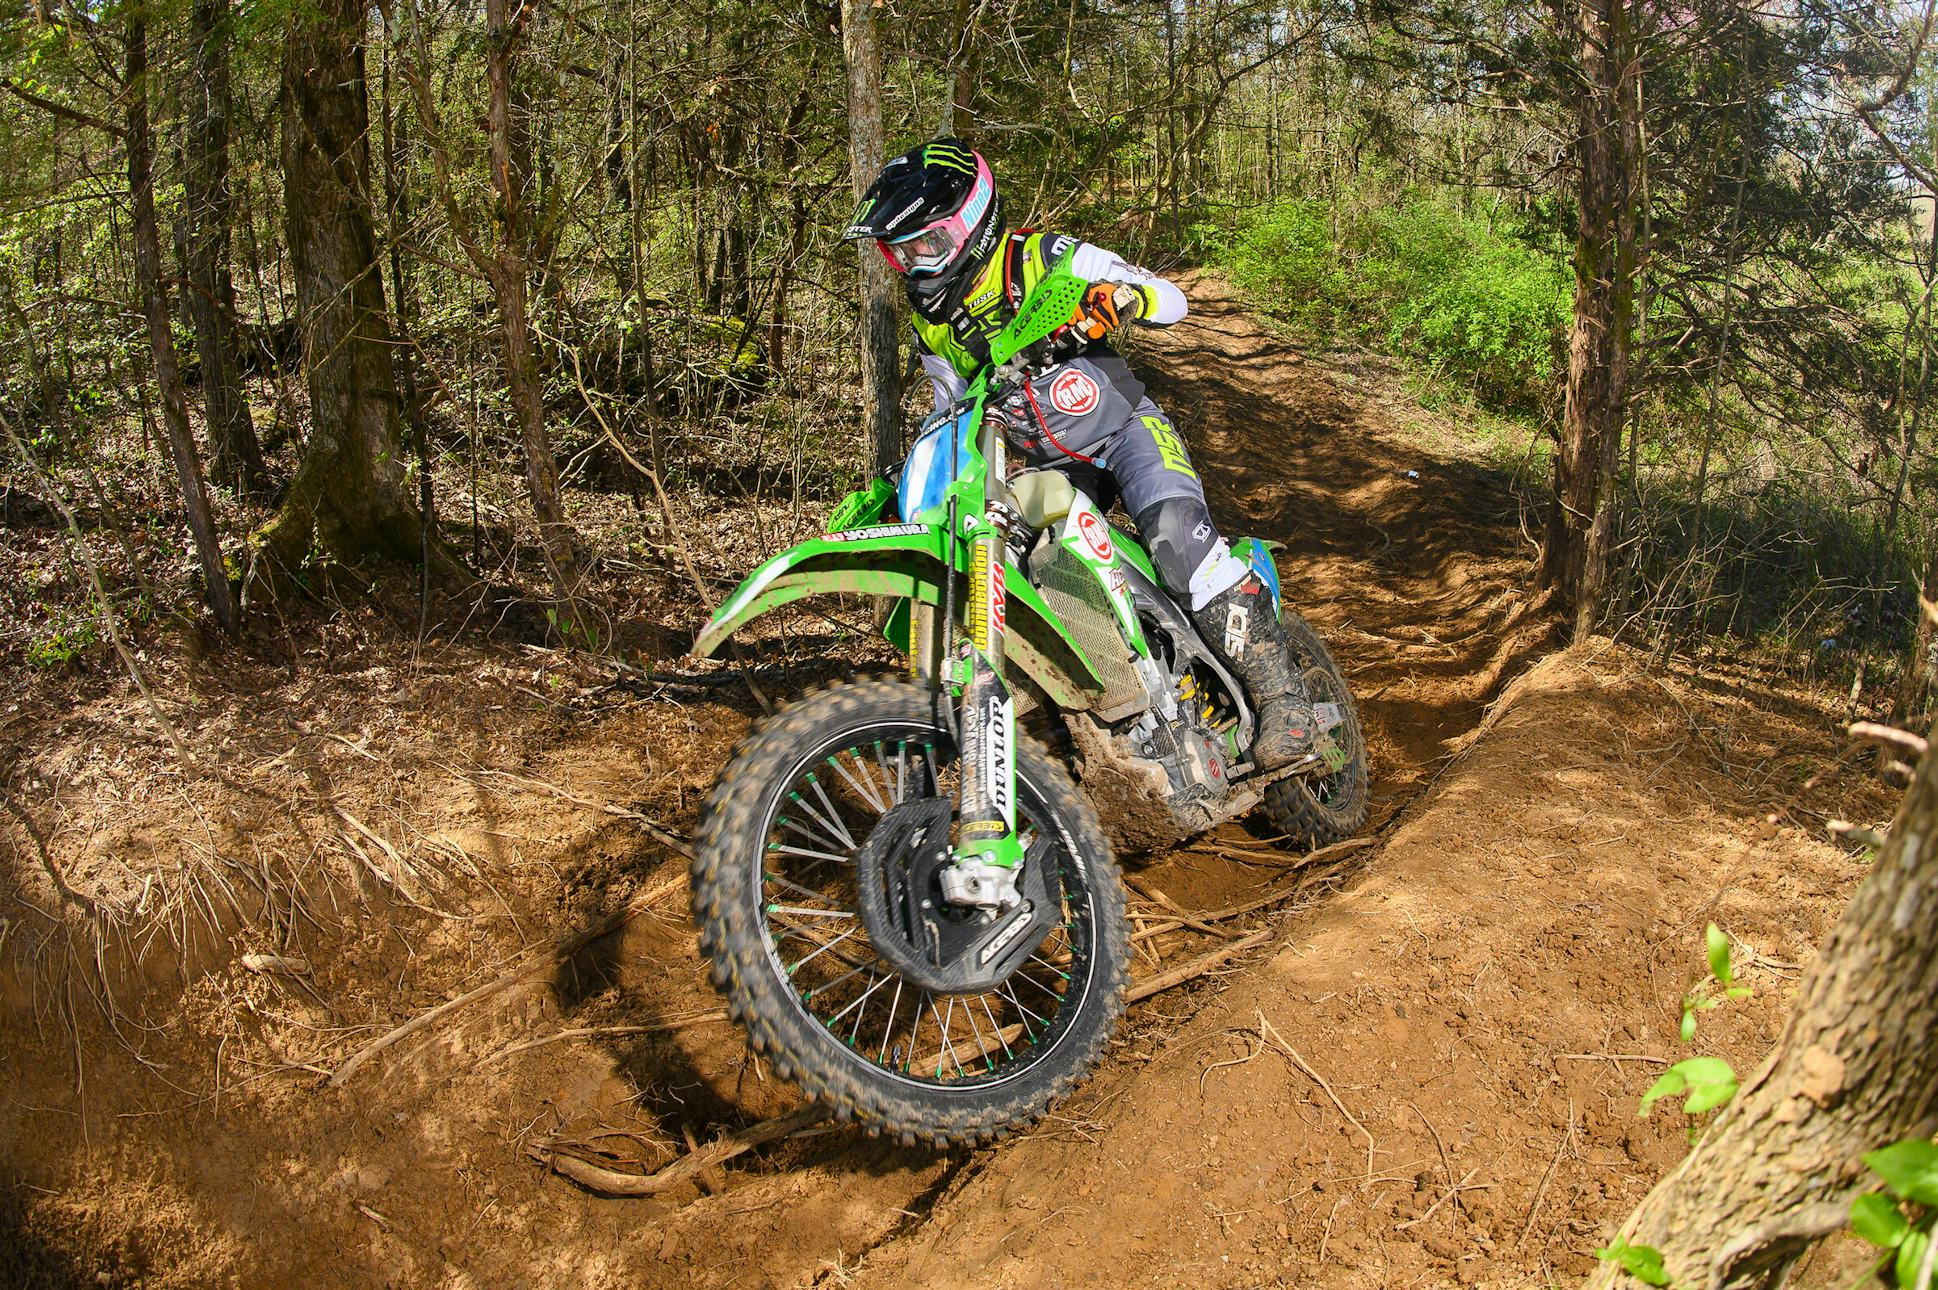 Rachael Archer (Rocky Mountain Red Bear Kawasaki) earned her second WXC class win of the season in Tennessee.